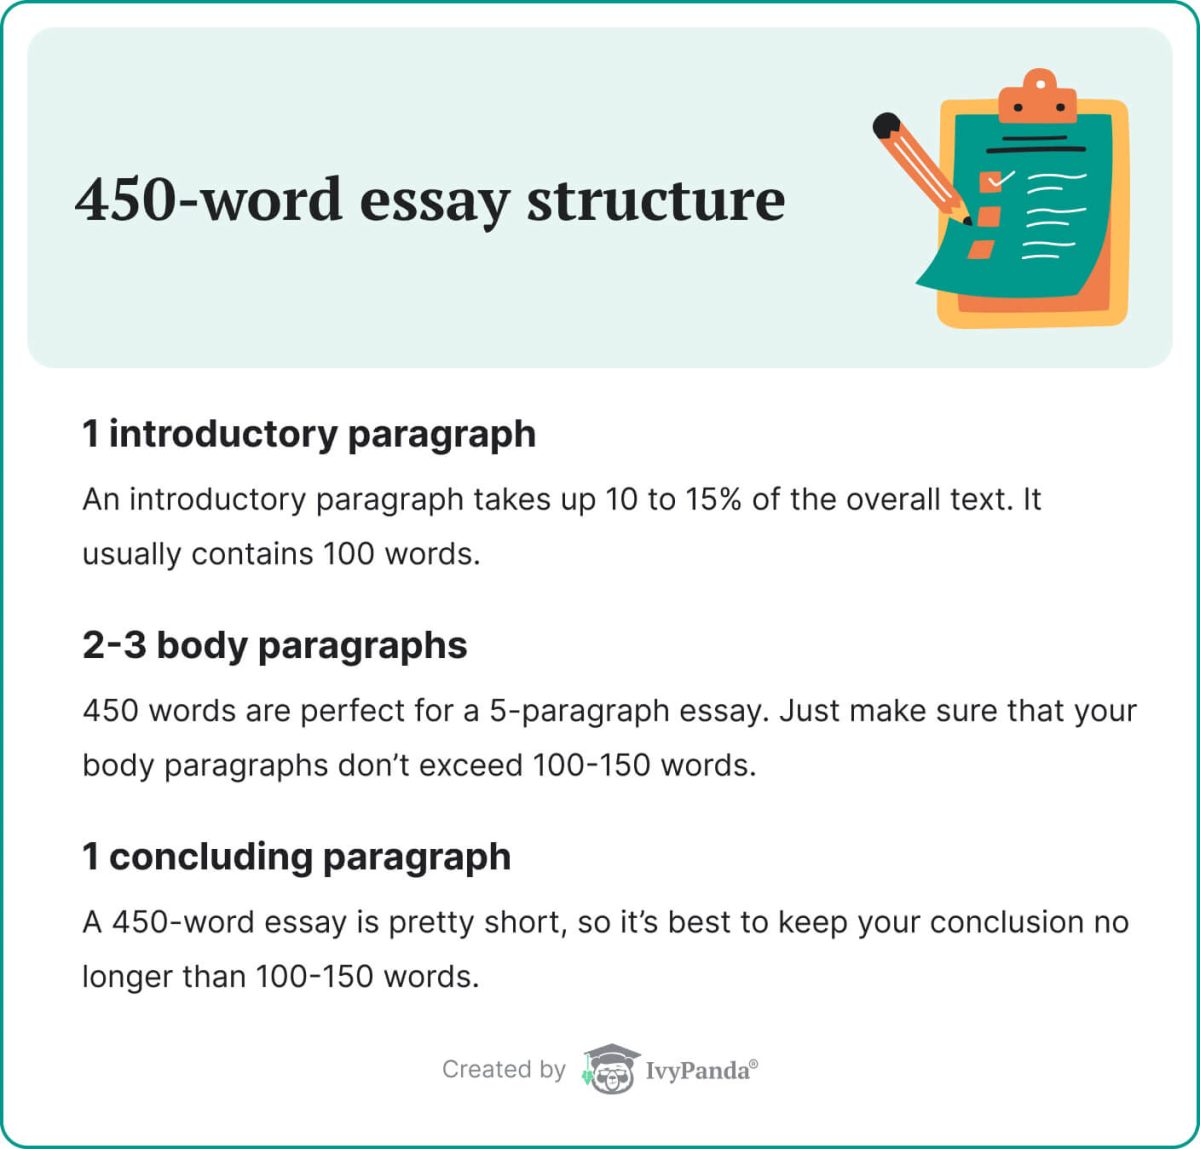 The picture shows 450-word essay structure.